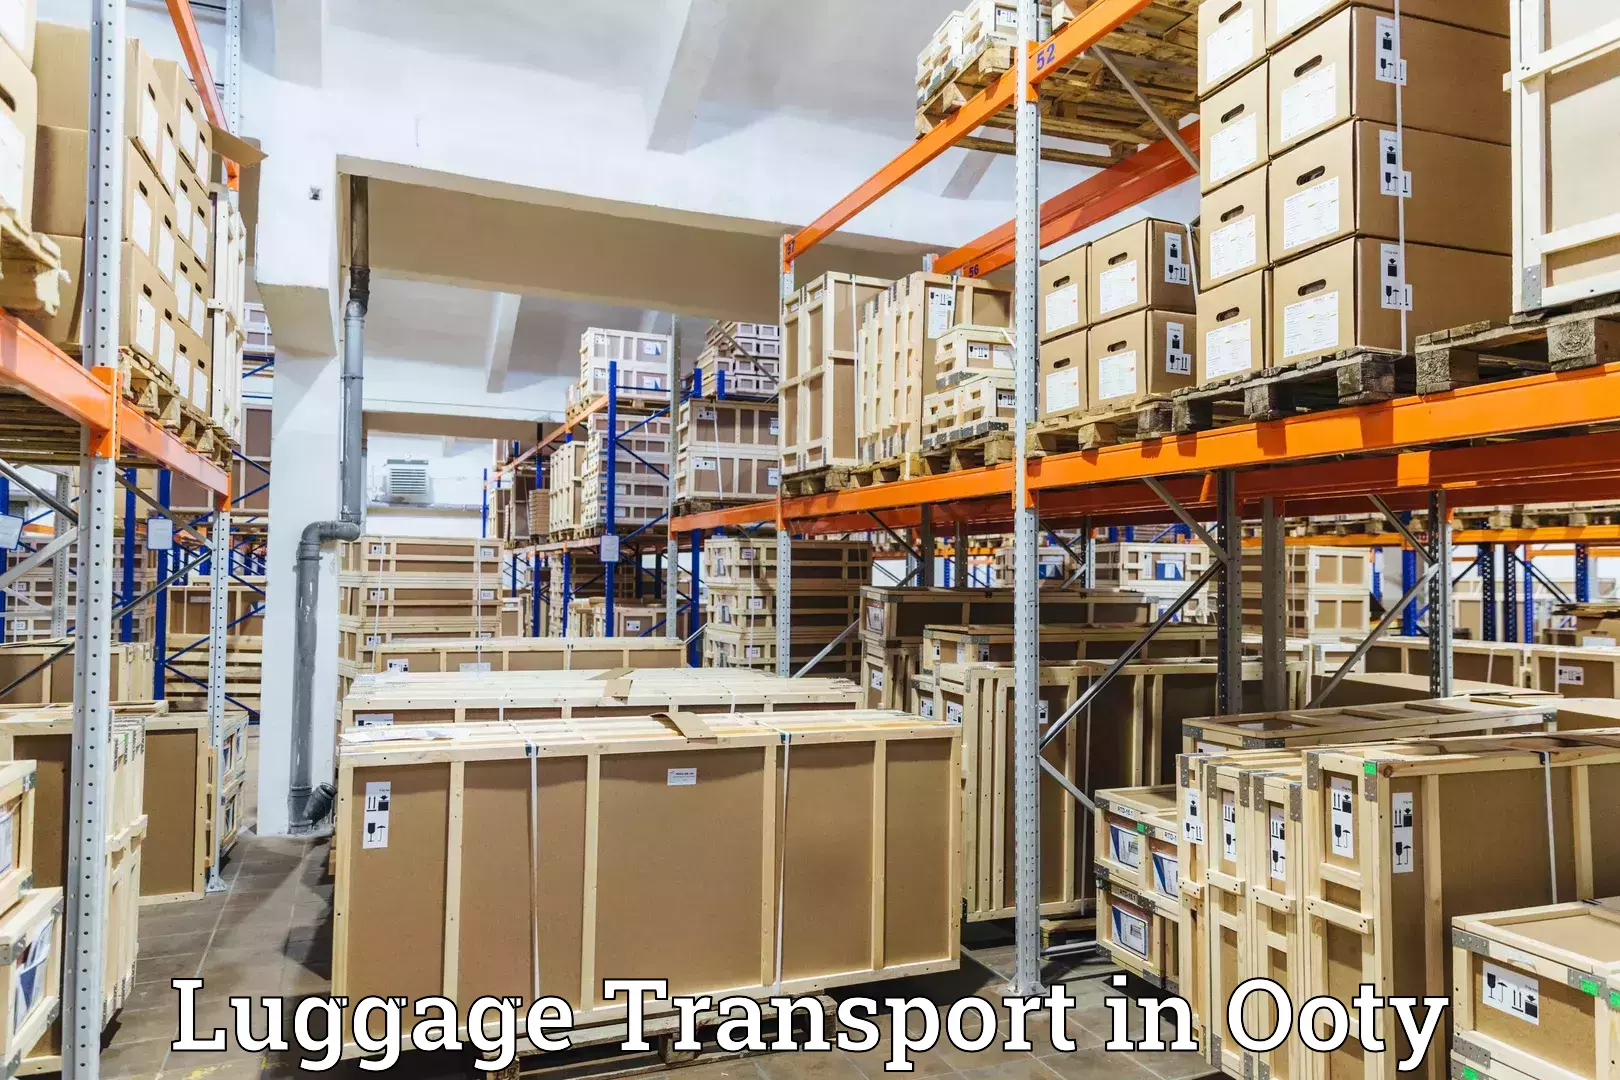 Luggage shipment tracking in Ooty